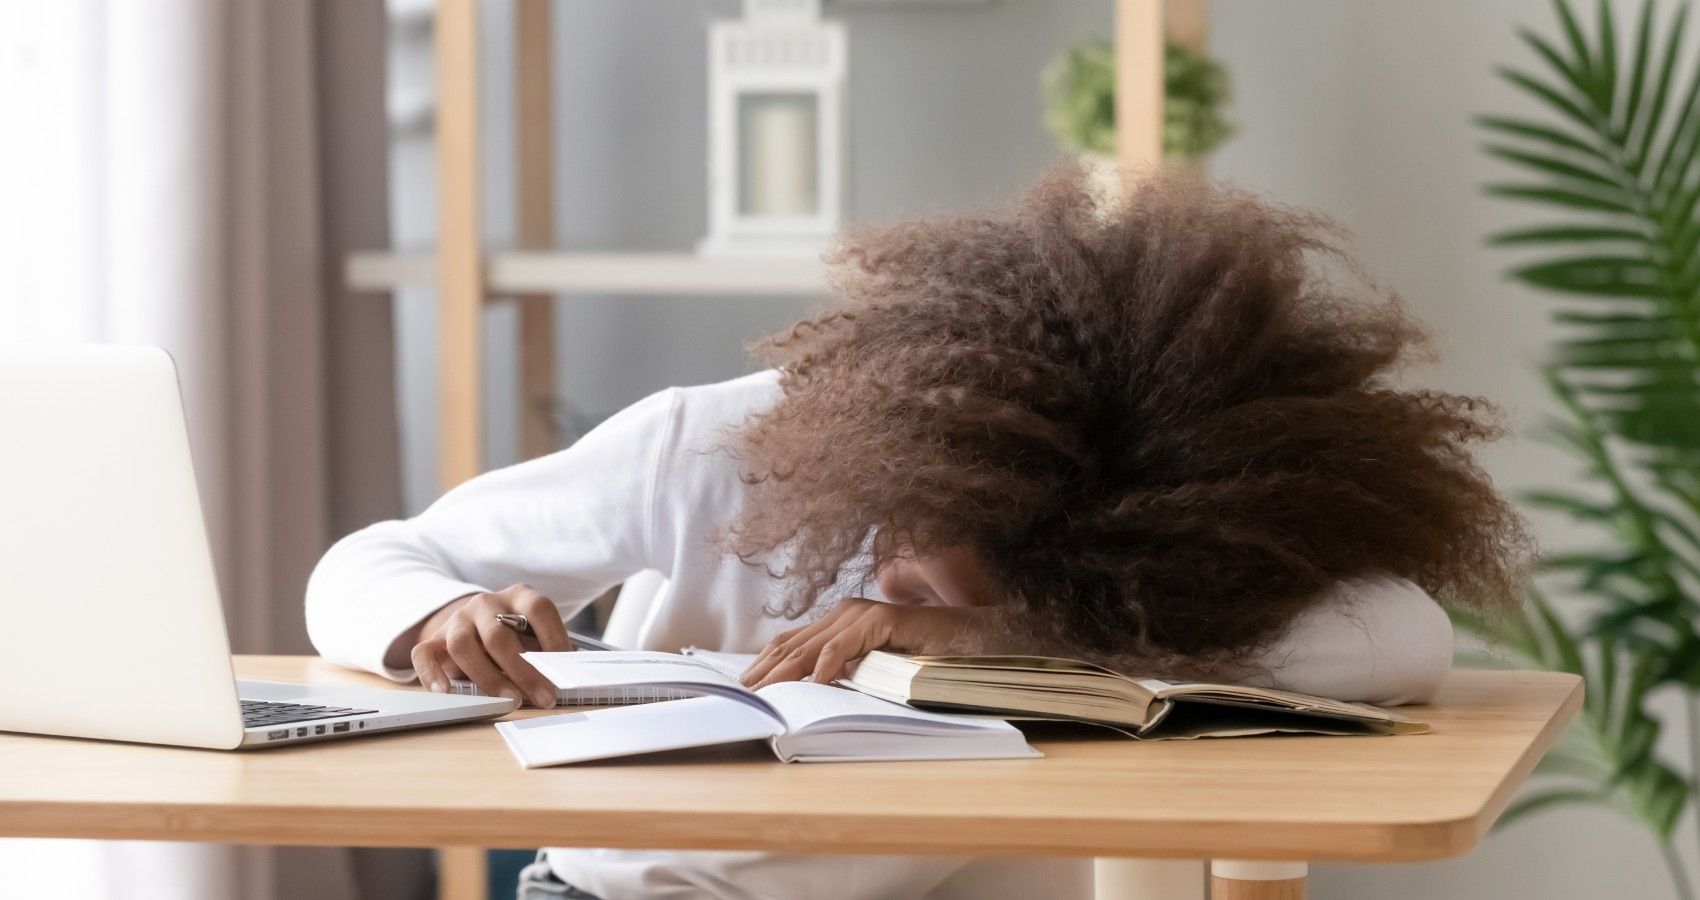 Kids' Lack Of Sleep Affects Their Behavior & Academics In Class